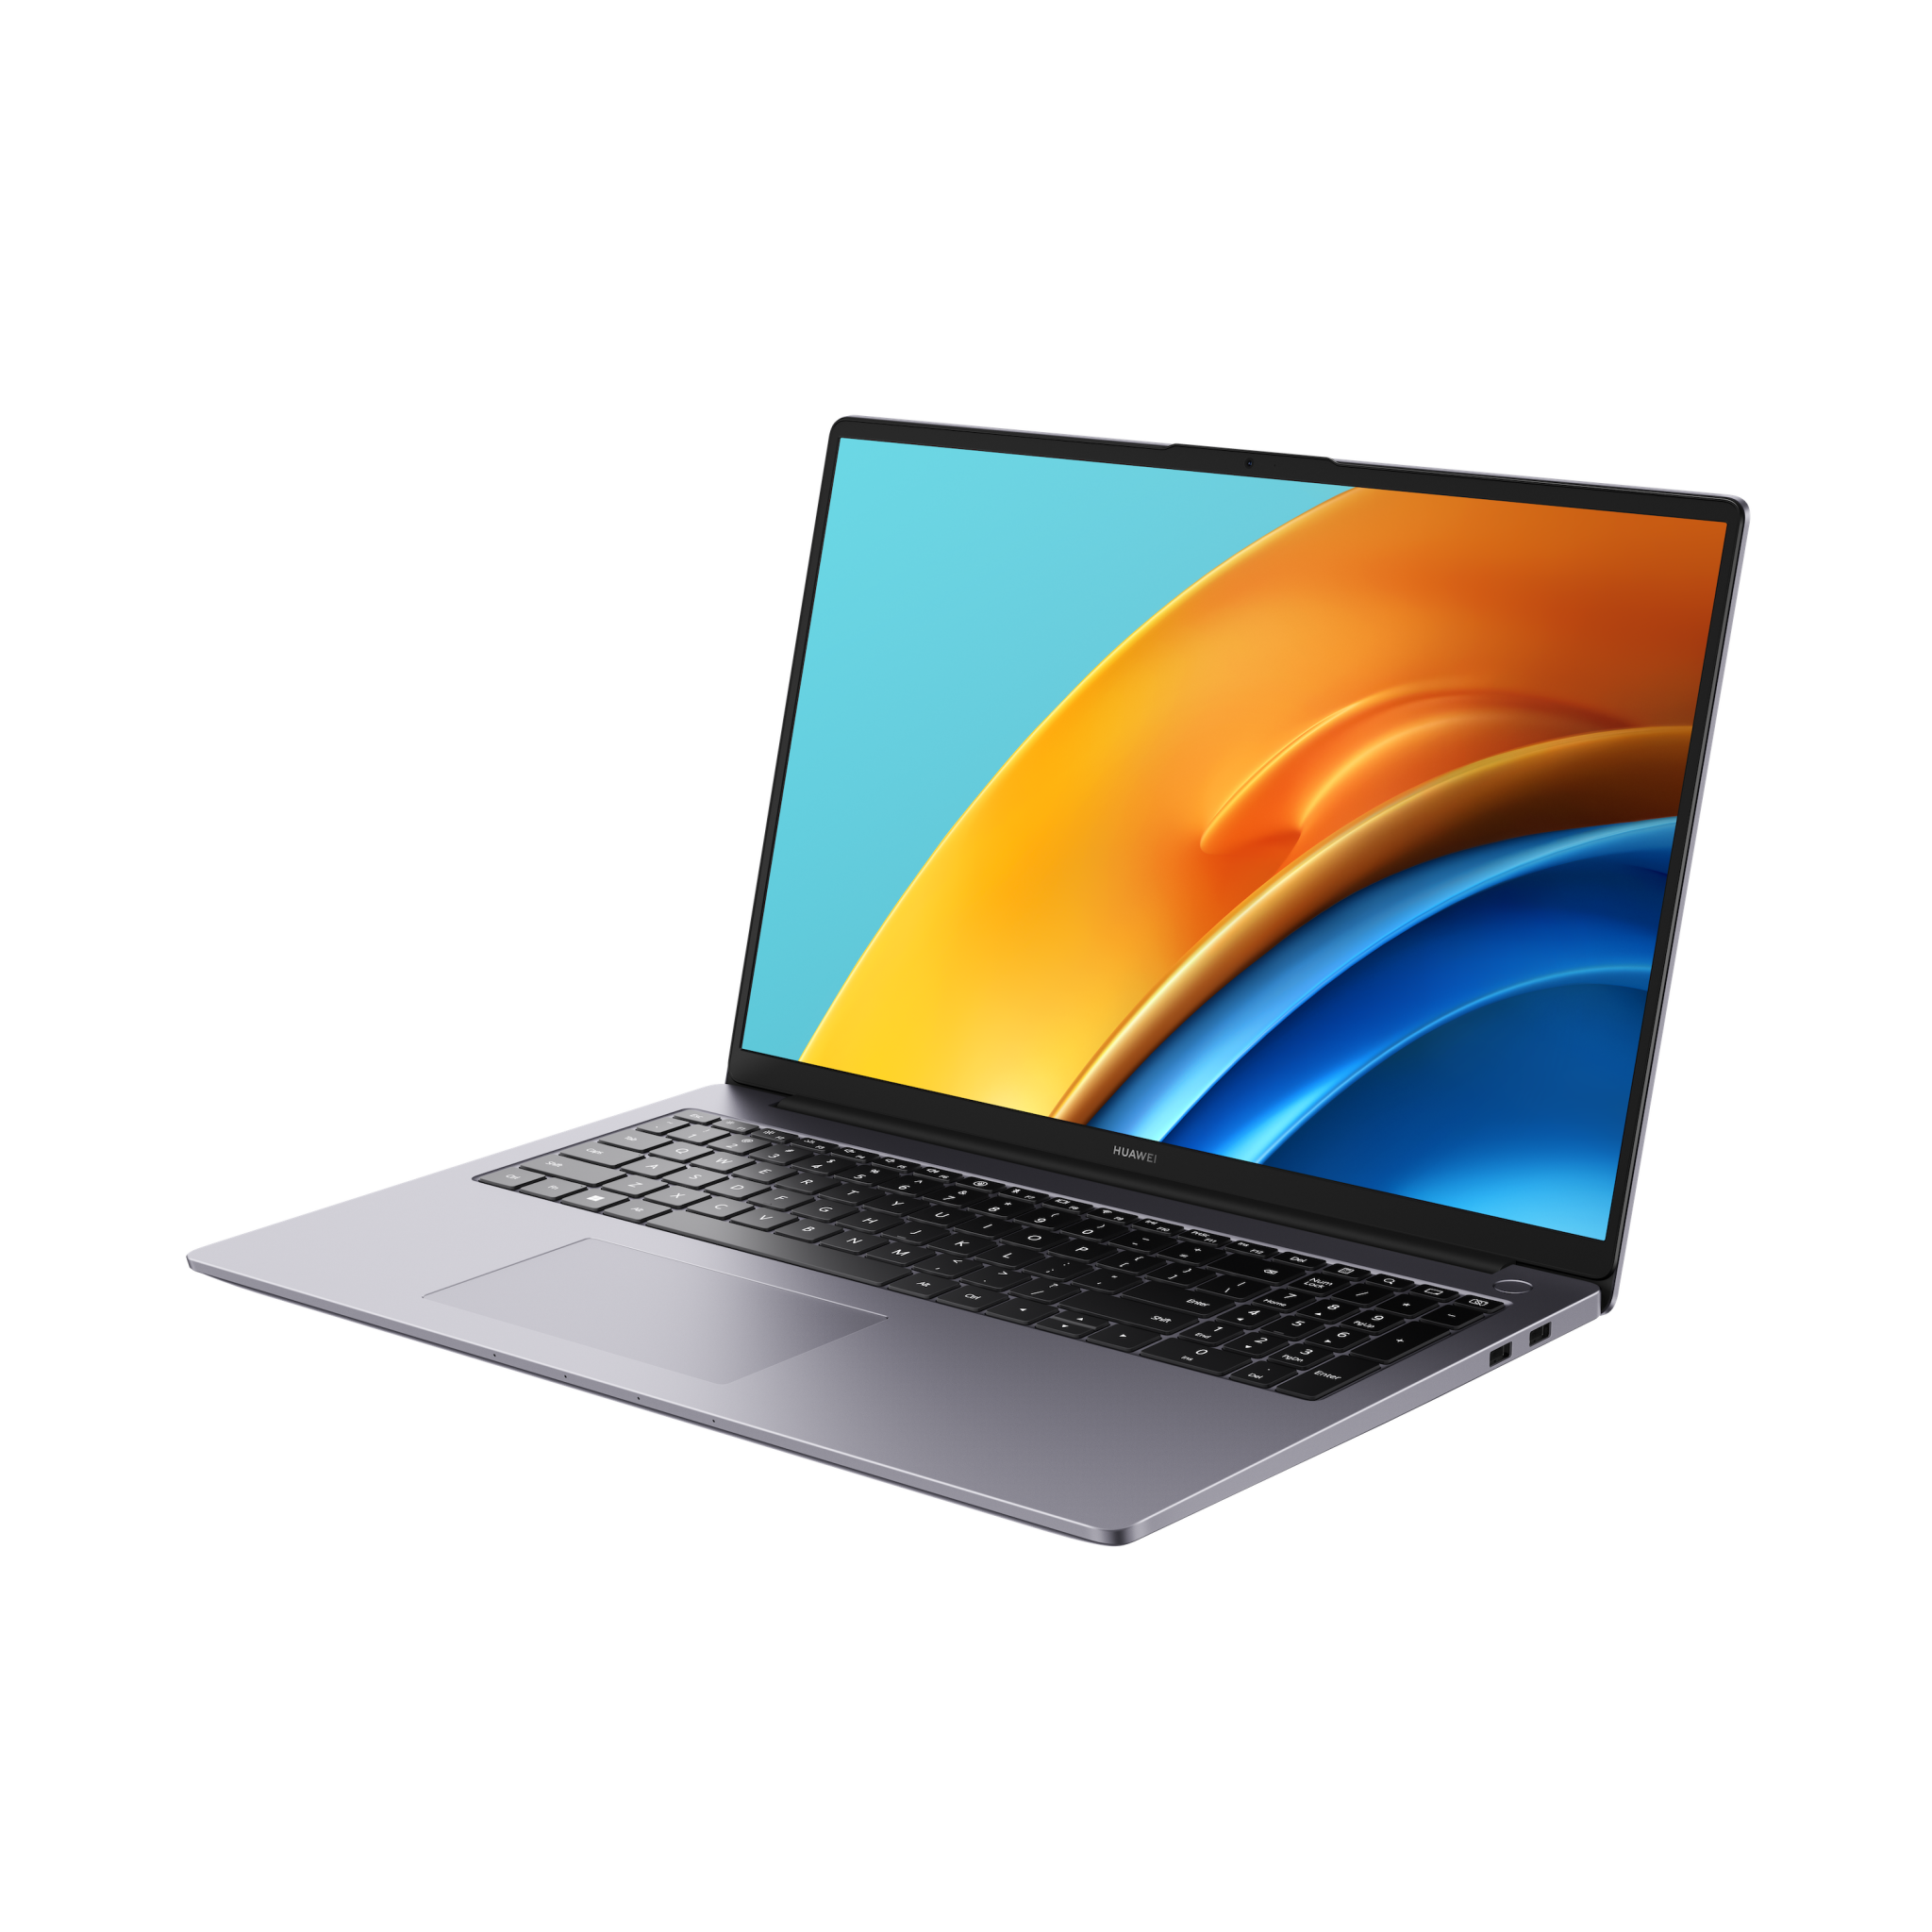 HUAWEI MateBook D16: the laptop for work and study